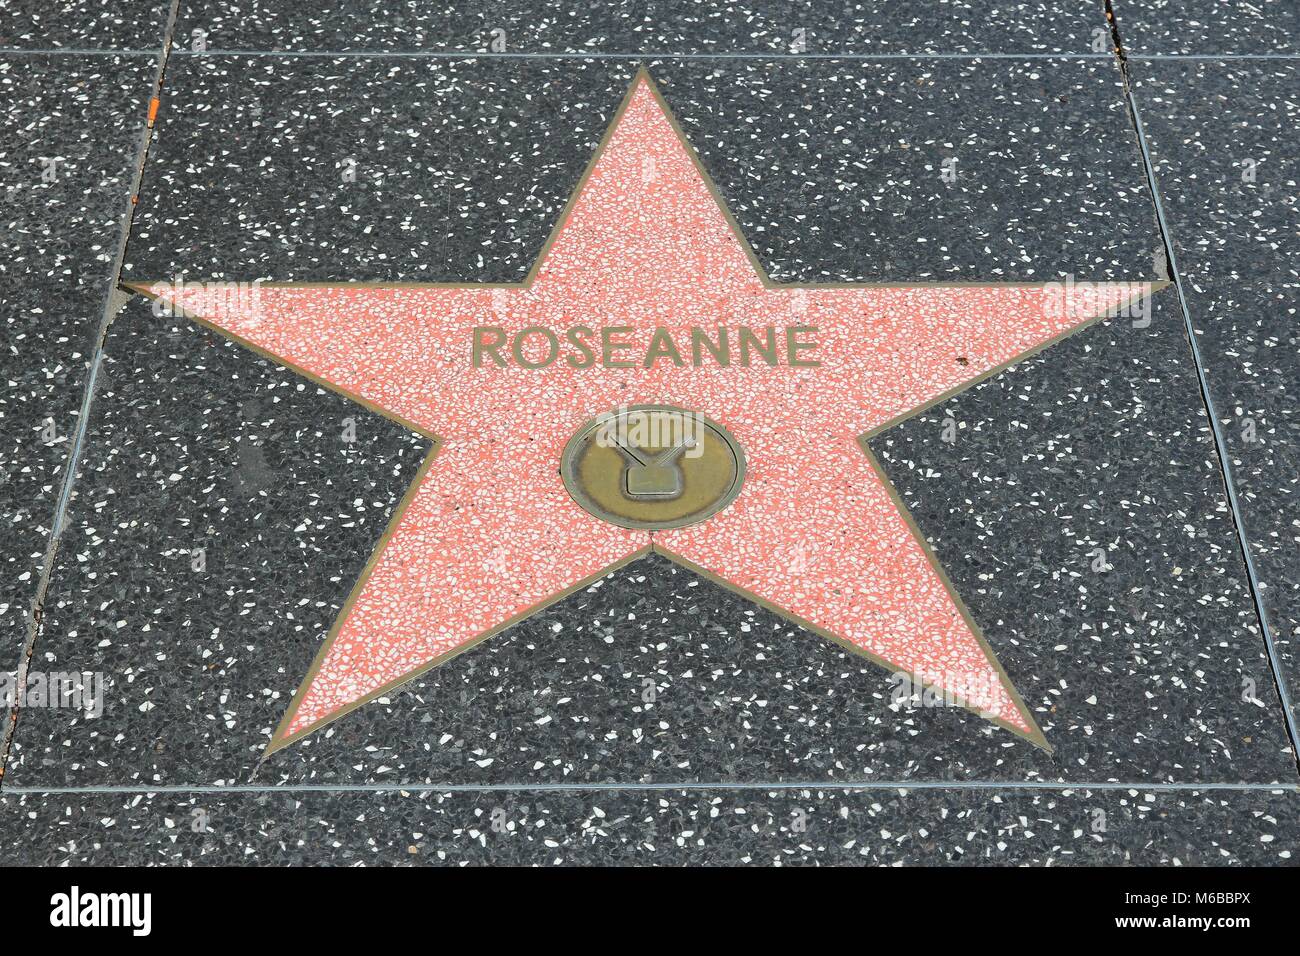 LOS ANGELES, USA - APRIL 5, 2014: Roseanne star at famous Walk of Fame in Hollywood. Hollywood Walk of Fame features more than 2,500 stars with inscri Stock Photo